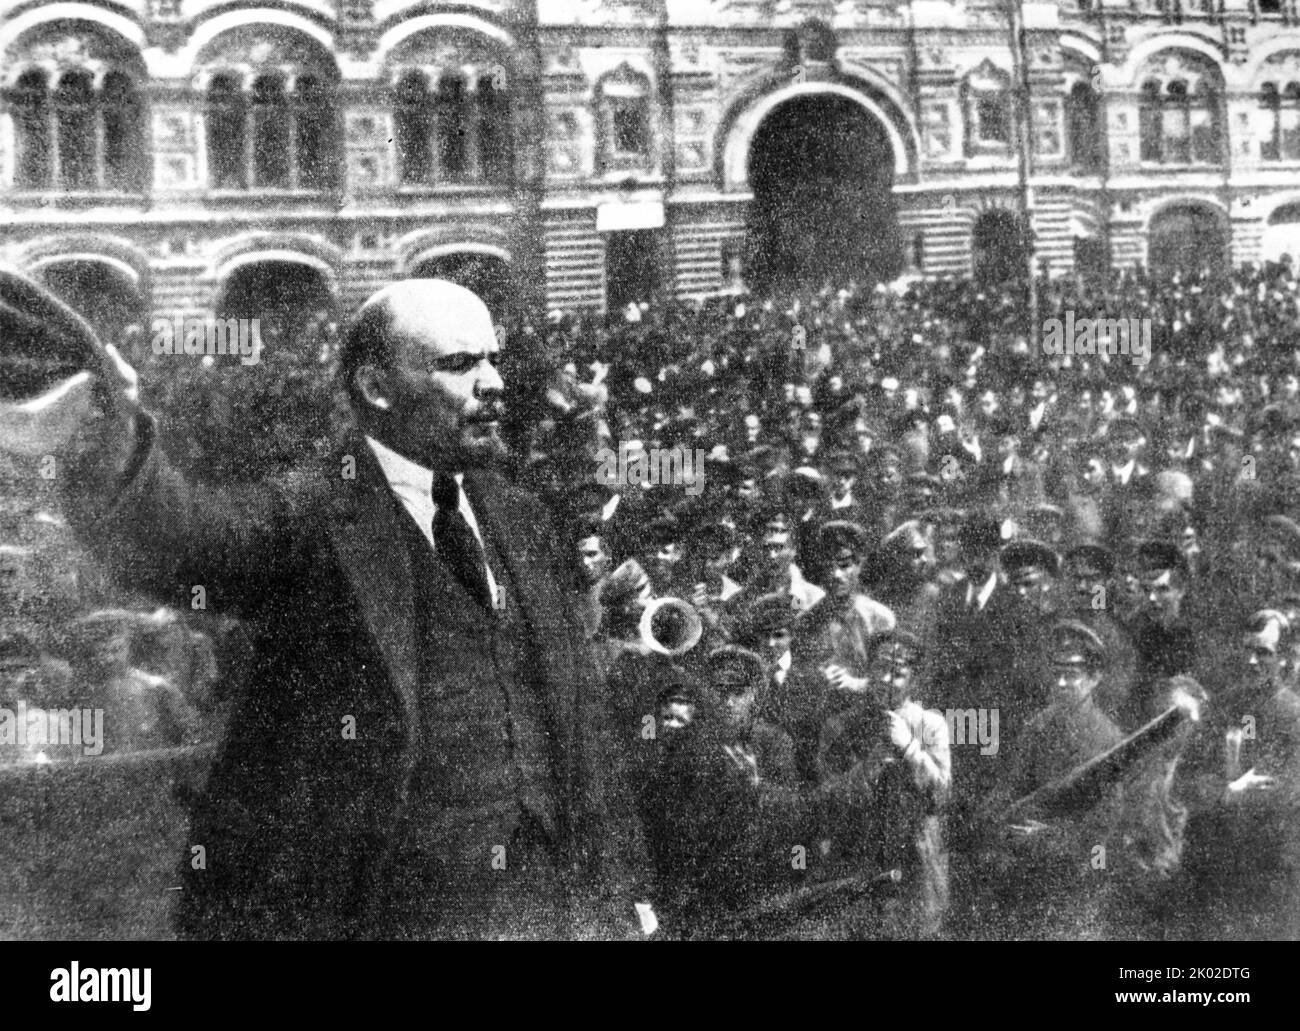 Speech by V.I. Lenin in front of the Vsevobuch regiments on Red Square. Moscow. May 25, 1919. Stock Photo